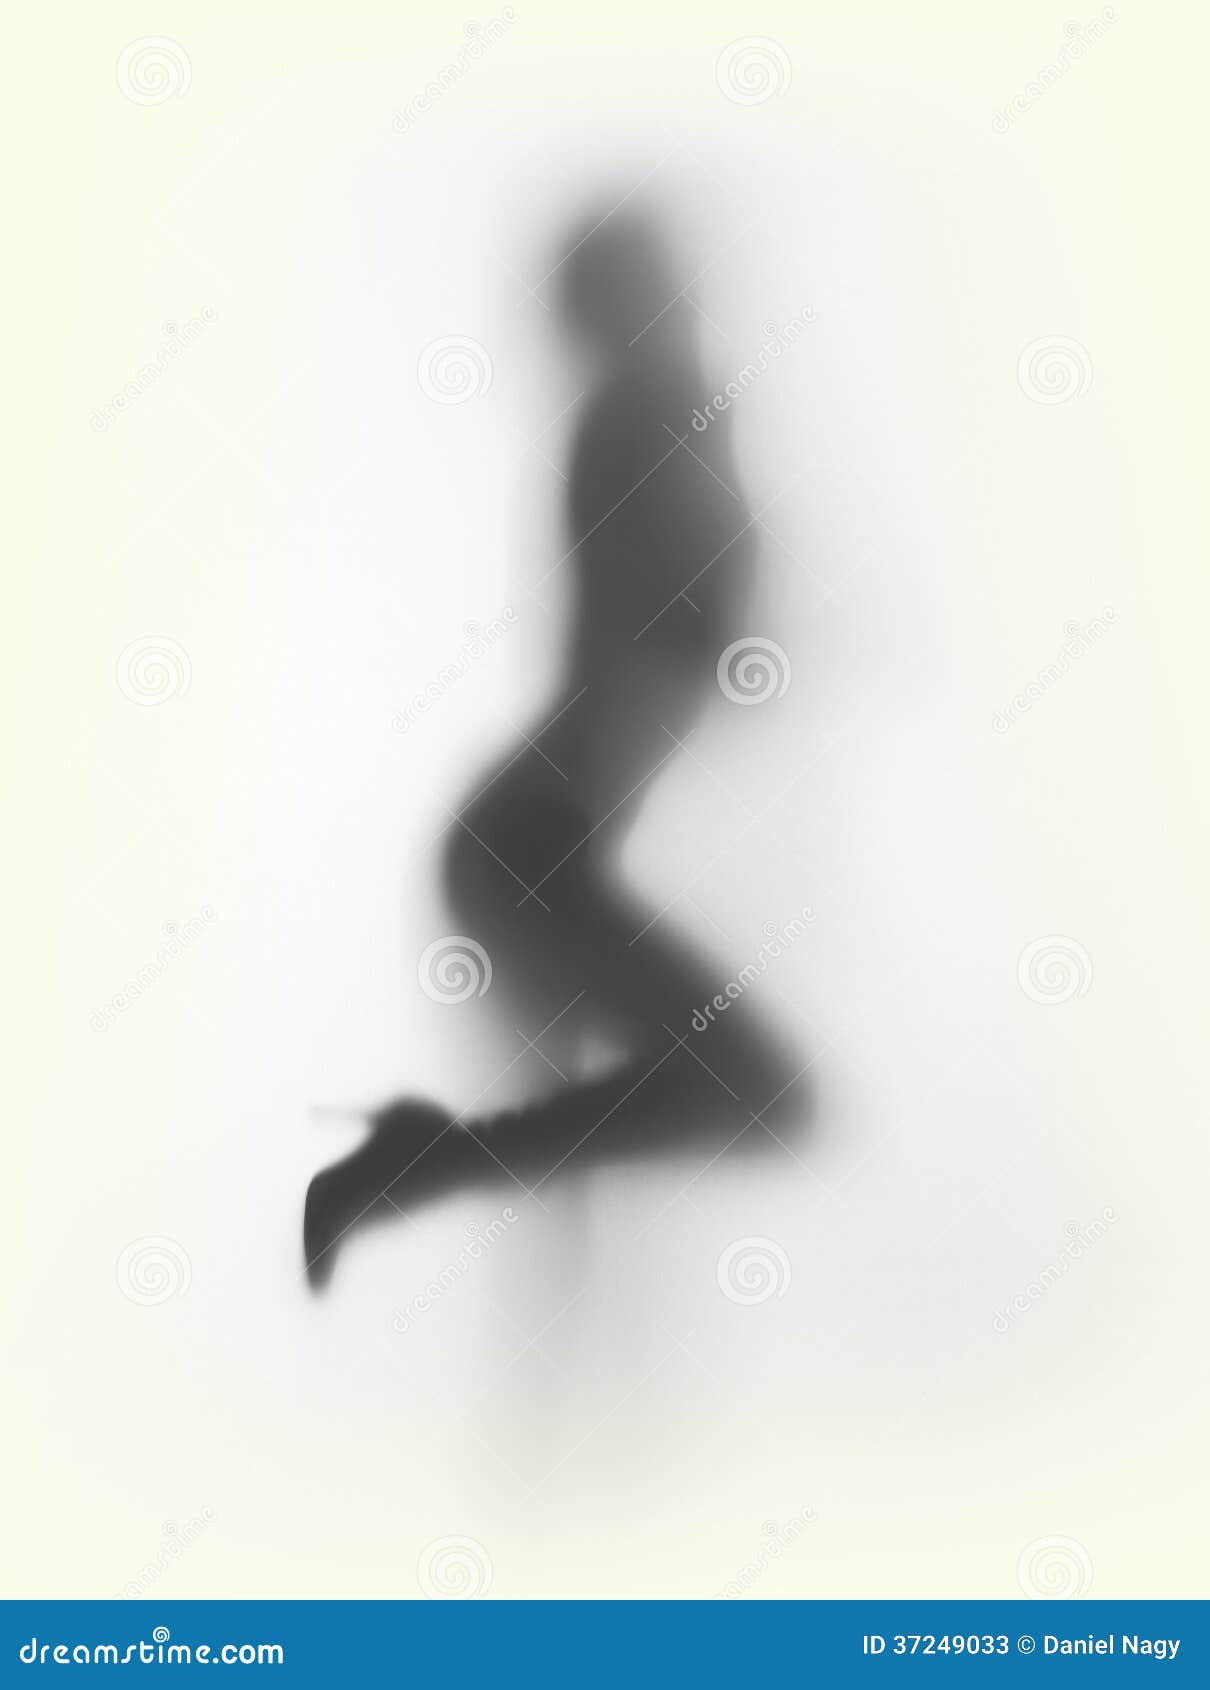 Slim woman with high heel shoes, silhouette. Human female body behind a diffuse glass surface